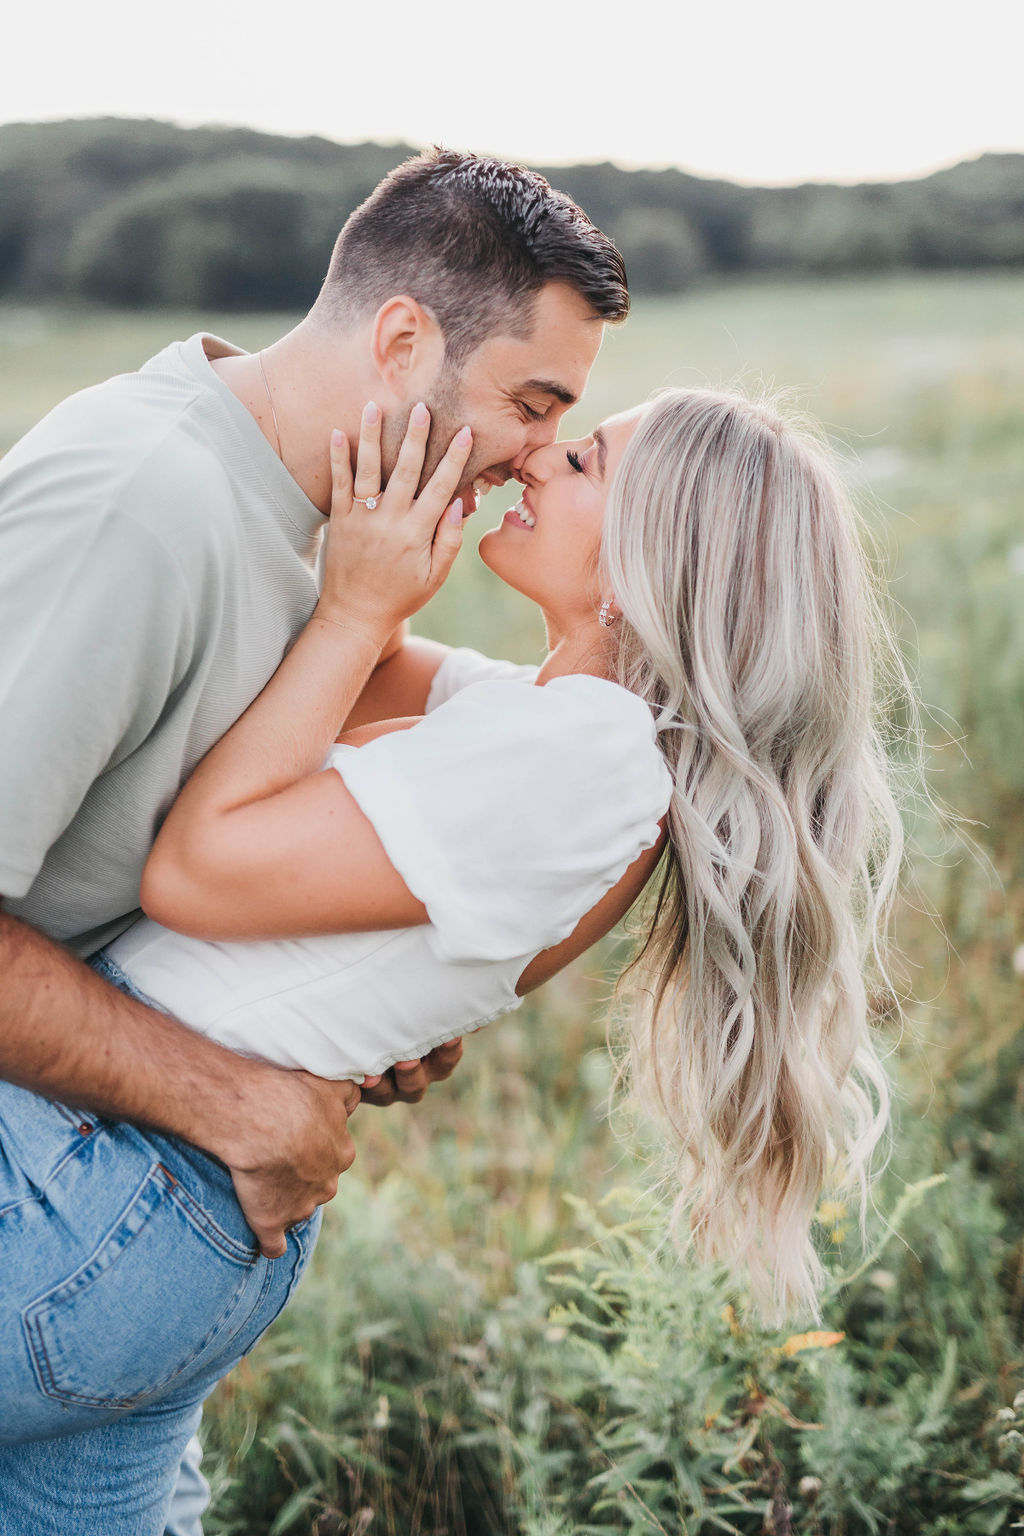 Philadelphia engagement session photos in a field